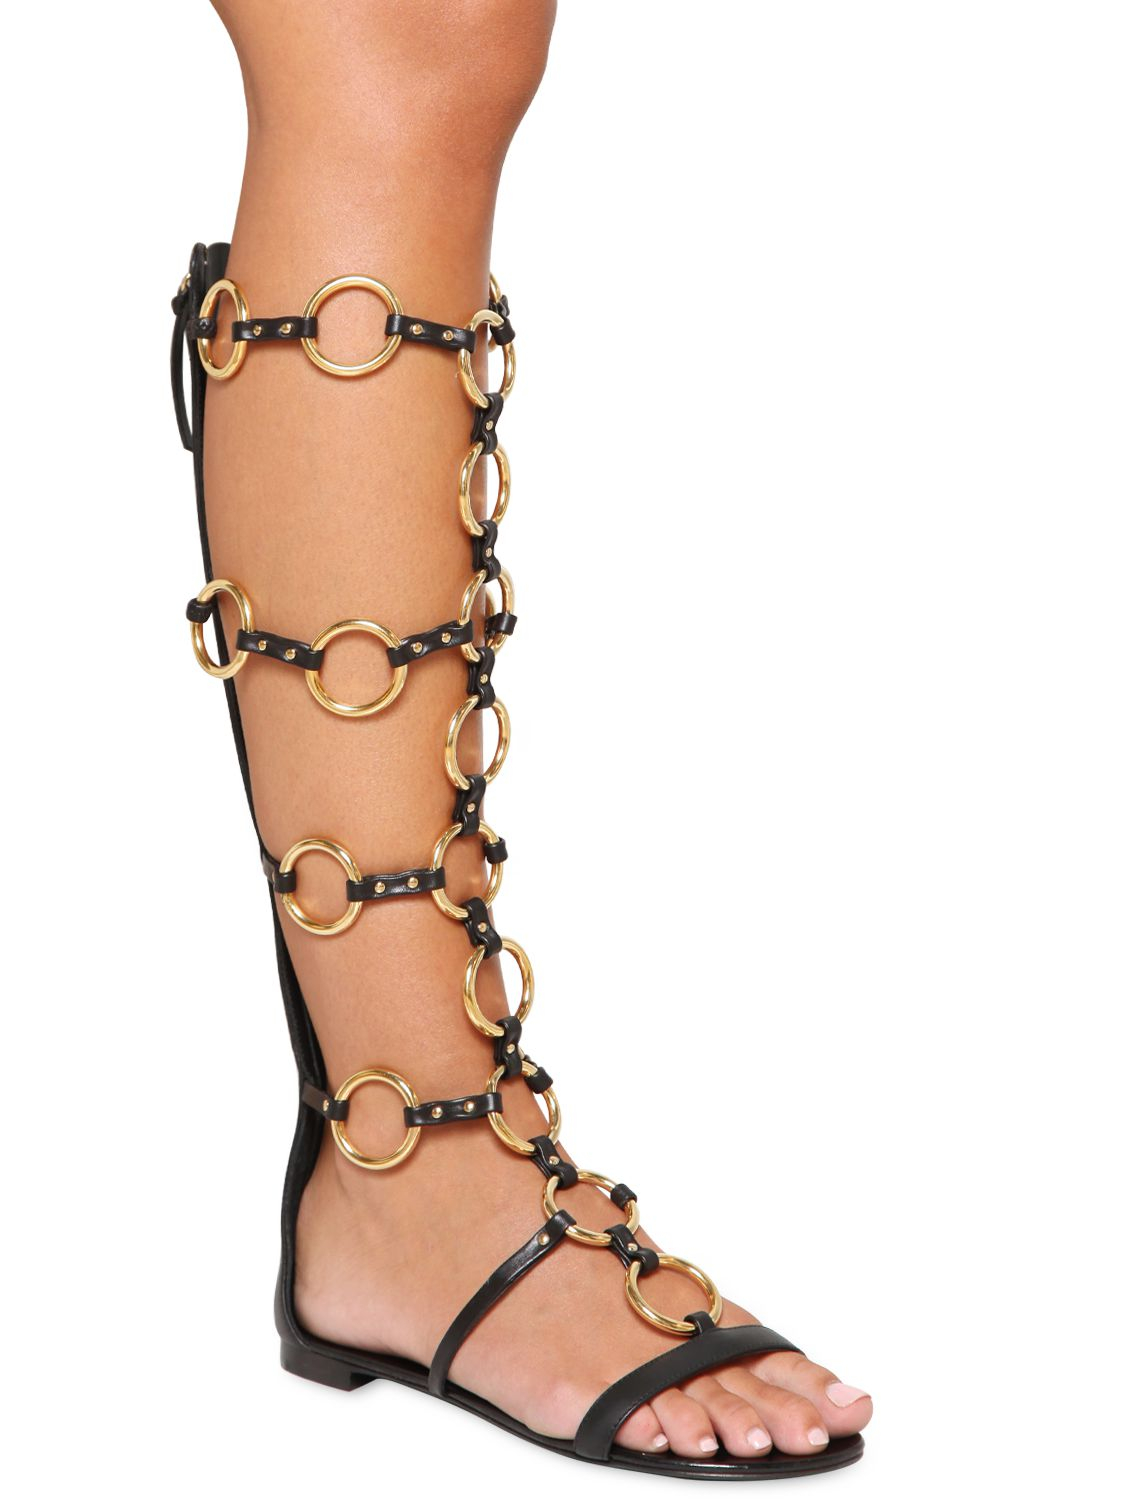 Giuseppe zanotti 10mm Leather Chained Gladiator Sandal in Black | Lyst